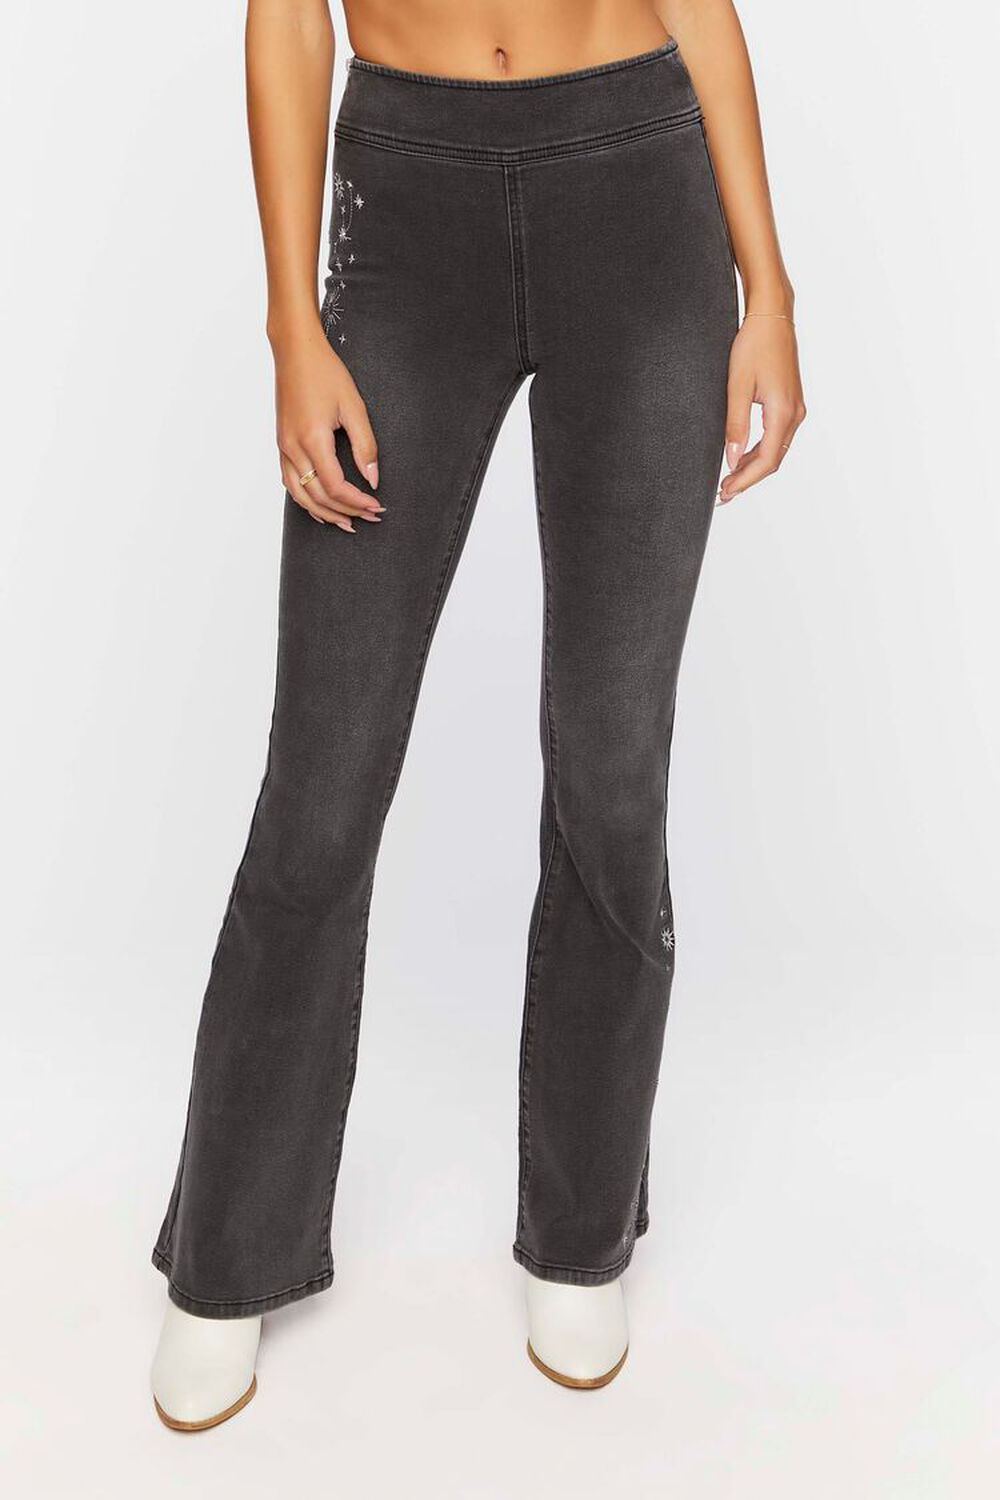 WASHED BLACK Embroidered High-Rise Flare Jeans, image 1